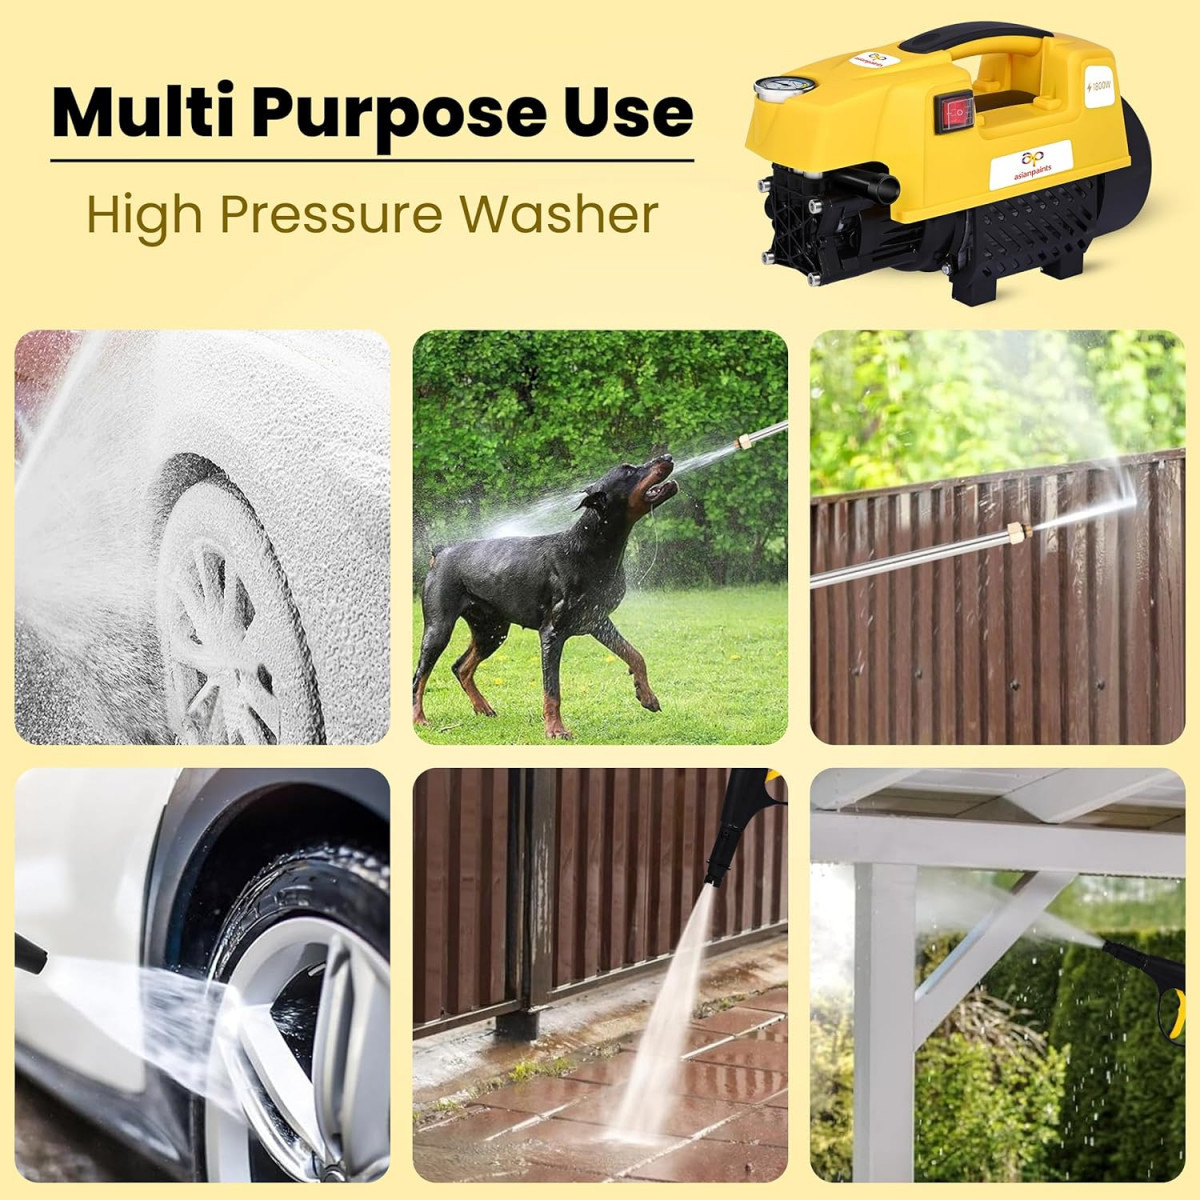 Asian Paints Trucare High Pressure Washer 1800w 120 bar Pressure  7 Litremin Flow Rate  8 Meters Outlet Hose provided  Portable Used for Home Cleaning Bike  car Cleaning  Grip Handle